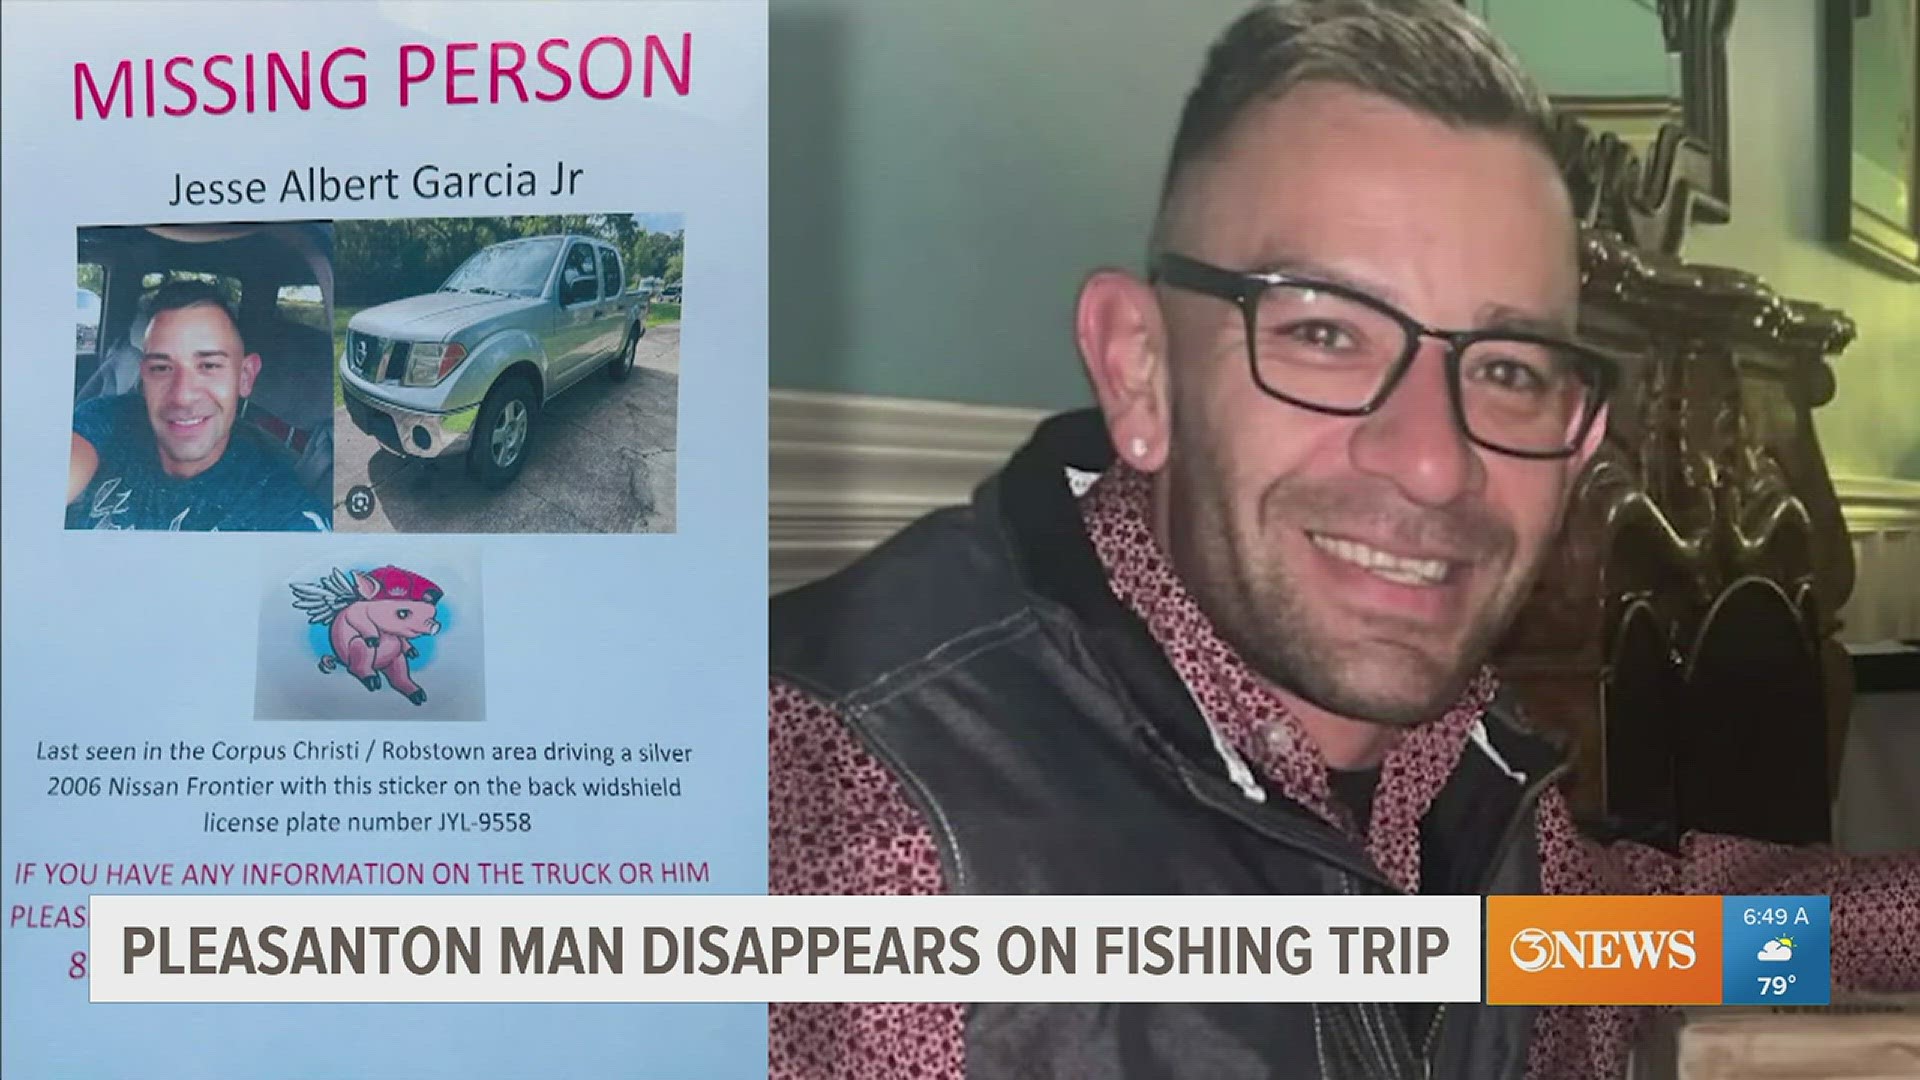 38-year-old Jesse Albert Garcia, Jr. told his family he was going to the Corpus/Robstown area to go fishing with friends. Foul play is suspected.